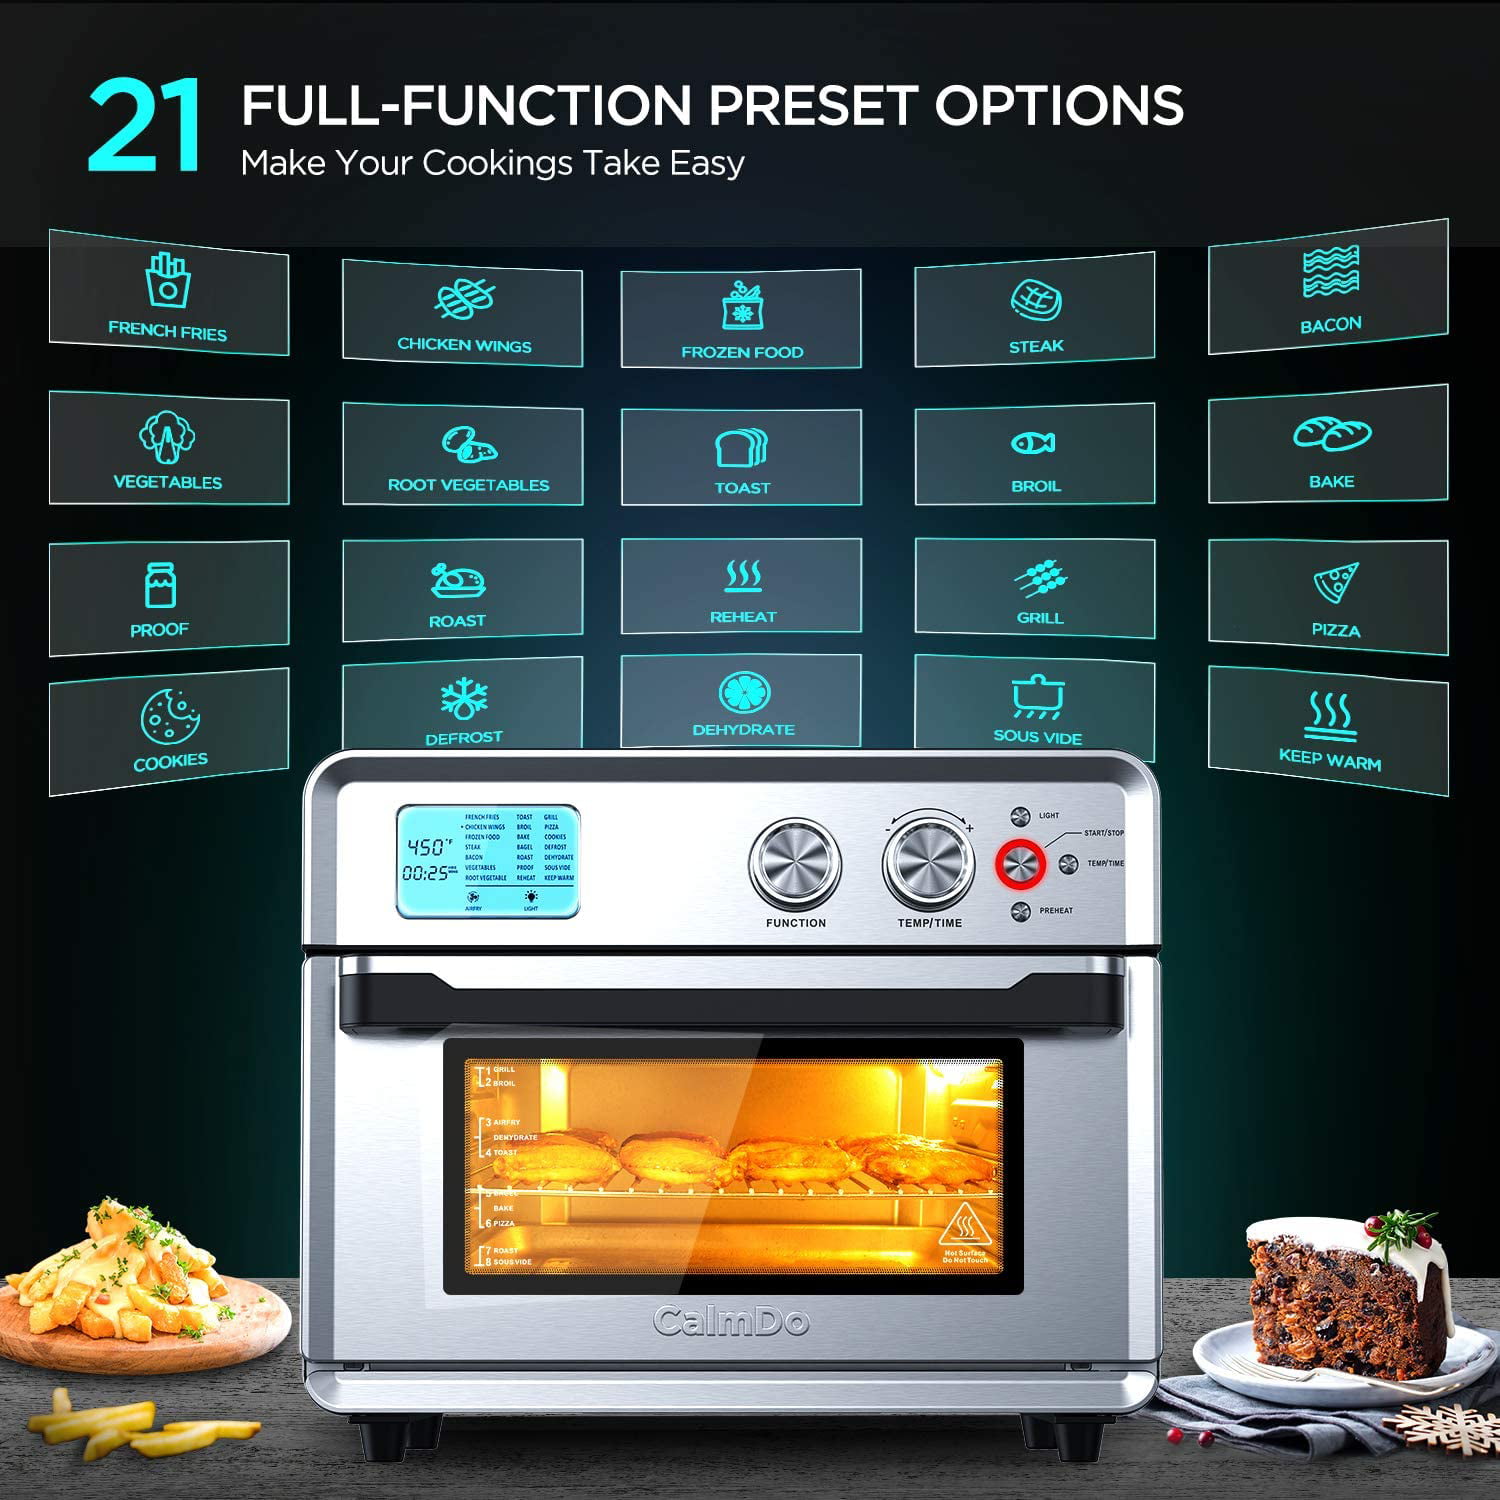 Bxvaty RNAB09M3TJWJR binkols air fryer oven 25 quart, 7-in-1 large toaster  oven air fryer combo, large air fryer with air fry, broil, toast, bake